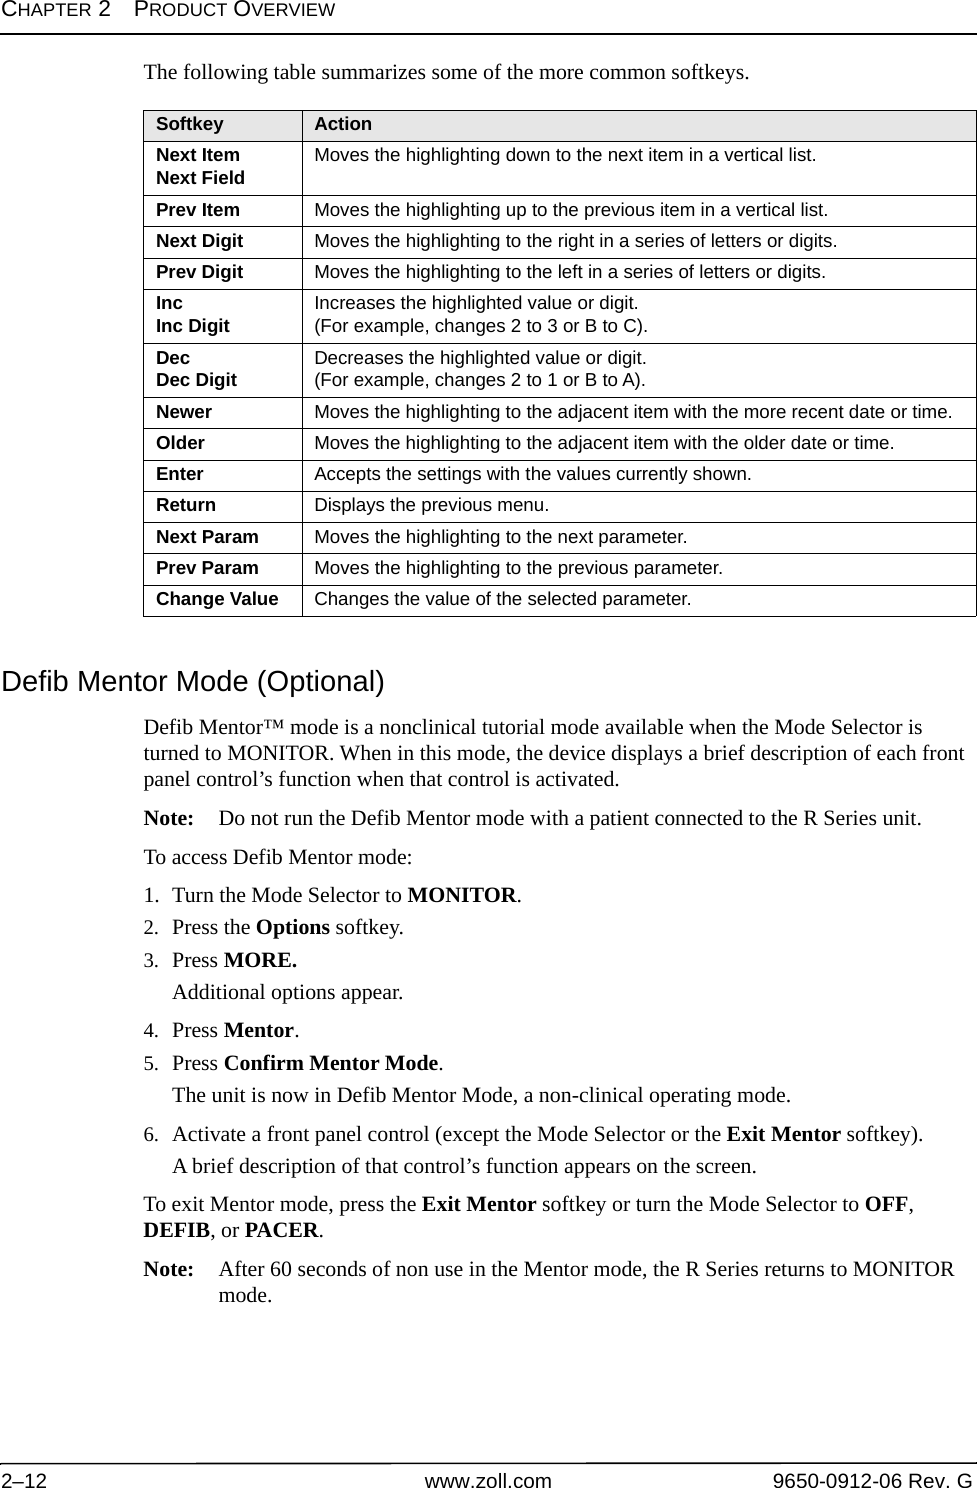 CHAPTER 2PRODUCT OVERVIEW2–12 www.zoll.com 9650-0912-06 Rev. GThe following table summarizes some of the more common softkeys.Defib Mentor Mode (Optional)Defib Mentor™ mode is a nonclinical tutorial mode available when the Mode Selector is turned to MONITOR. When in this mode, the device displays a brief description of each front panel control’s function when that control is activated.Note: Do not run the Defib Mentor mode with a patient connected to the R Series unit.To access Defib Mentor mode:1. Turn the Mode Selector to MONITOR.2. Press the Options softkey. 3. Press MORE.Additional options appear.4. Press Mentor.5. Press Confirm Mentor Mode.The unit is now in Defib Mentor Mode, a non-clinical operating mode.6. Activate a front panel control (except the Mode Selector or the Exit Mentor softkey).A brief description of that control’s function appears on the screen.To exit Mentor mode, press the Exit Mentor softkey or turn the Mode Selector to OFF, DEFIB, or PACER.Note: After 60 seconds of non use in the Mentor mode, the R Series returns to MONITOR mode.Softkey ActionNext ItemNext Field Moves the highlighting down to the next item in a vertical list.Prev Item Moves the highlighting up to the previous item in a vertical list. Next Digit Moves the highlighting to the right in a series of letters or digits.Prev Digit Moves the highlighting to the left in a series of letters or digits. IncInc Digit Increases the highlighted value or digit.(For example, changes 2 to 3 or B to C).DecDec Digit Decreases the highlighted value or digit.(For example, changes 2 to 1 or B to A).Newer Moves the highlighting to the adjacent item with the more recent date or time.Older Moves the highlighting to the adjacent item with the older date or time.Enter Accepts the settings with the values currently shown.Return Displays the previous menu.Next Param Moves the highlighting to the next parameter.Prev Param Moves the highlighting to the previous parameter.Change Value Changes the value of the selected parameter.